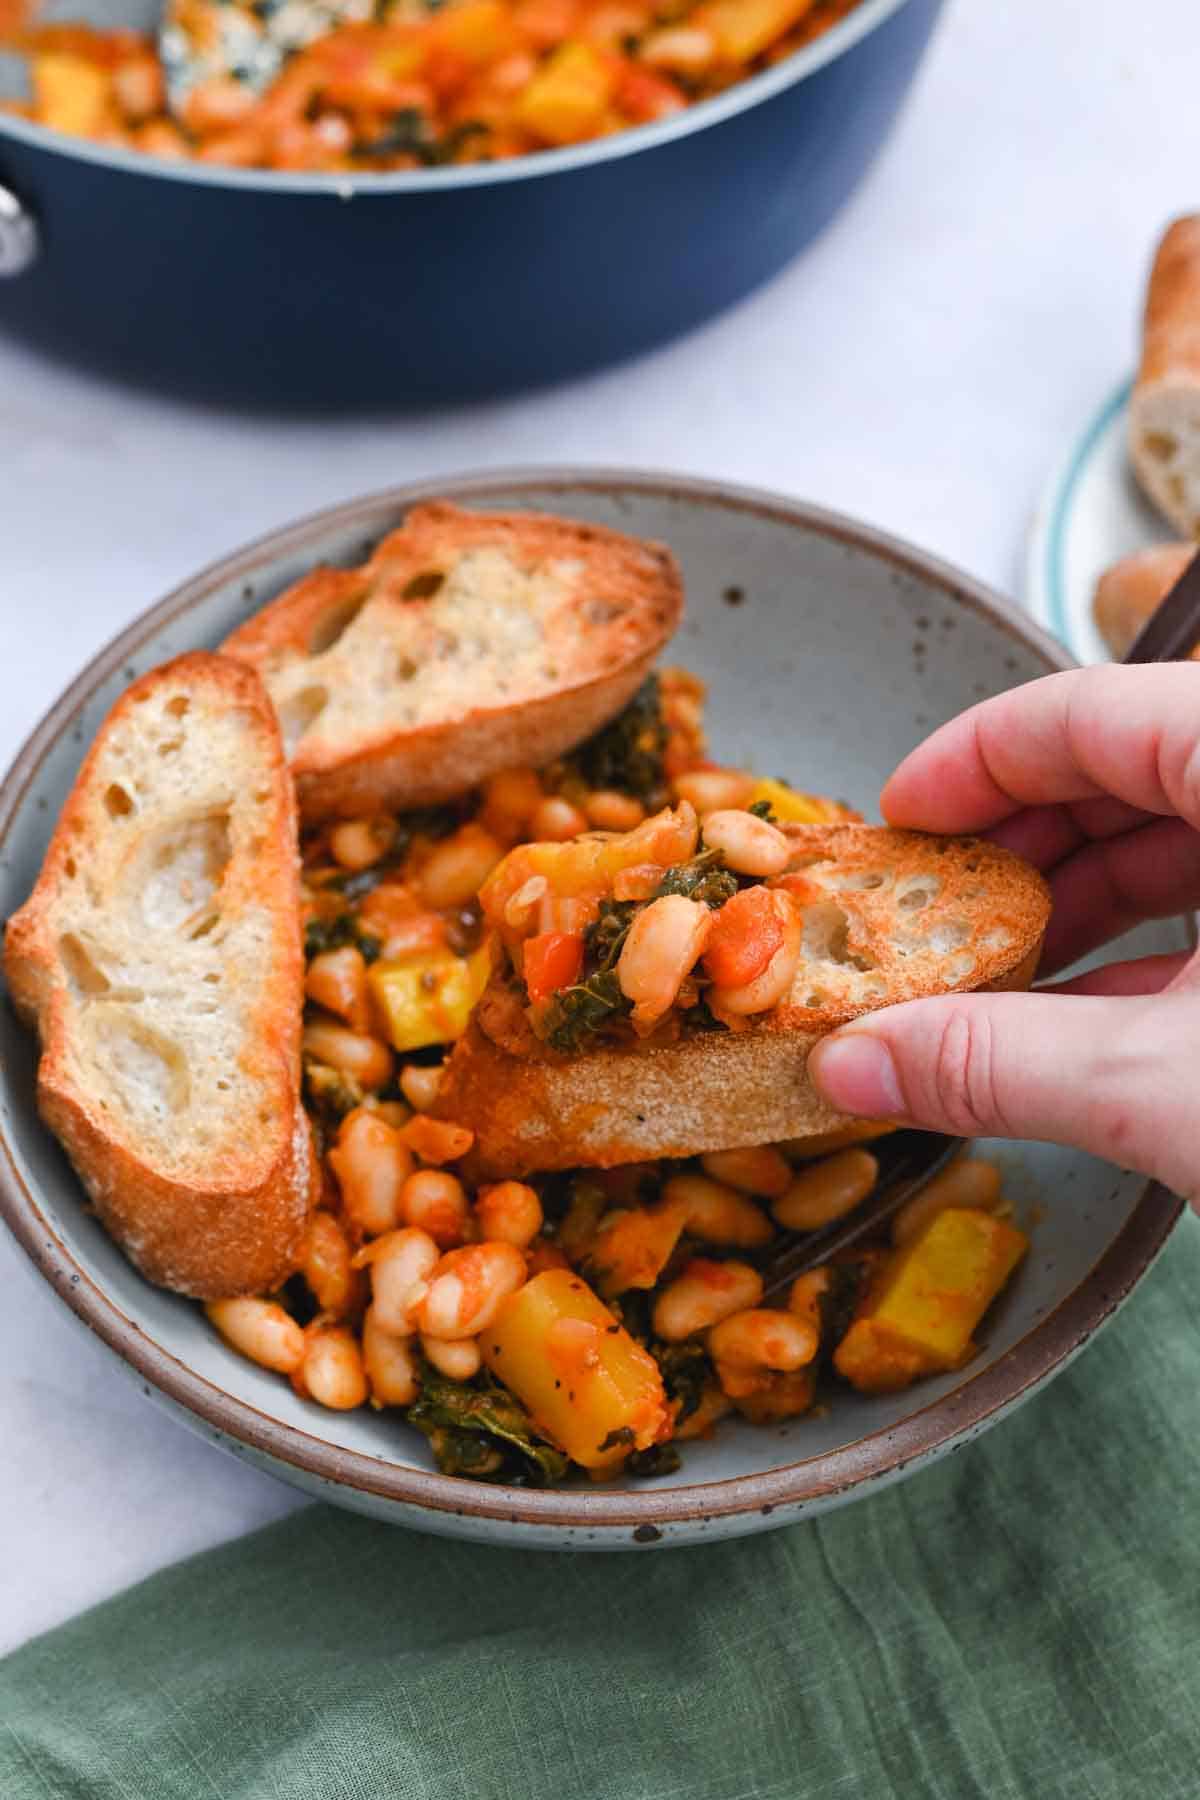 Hand lifting a piece of toast with beans on top out of a bowl of white beans.